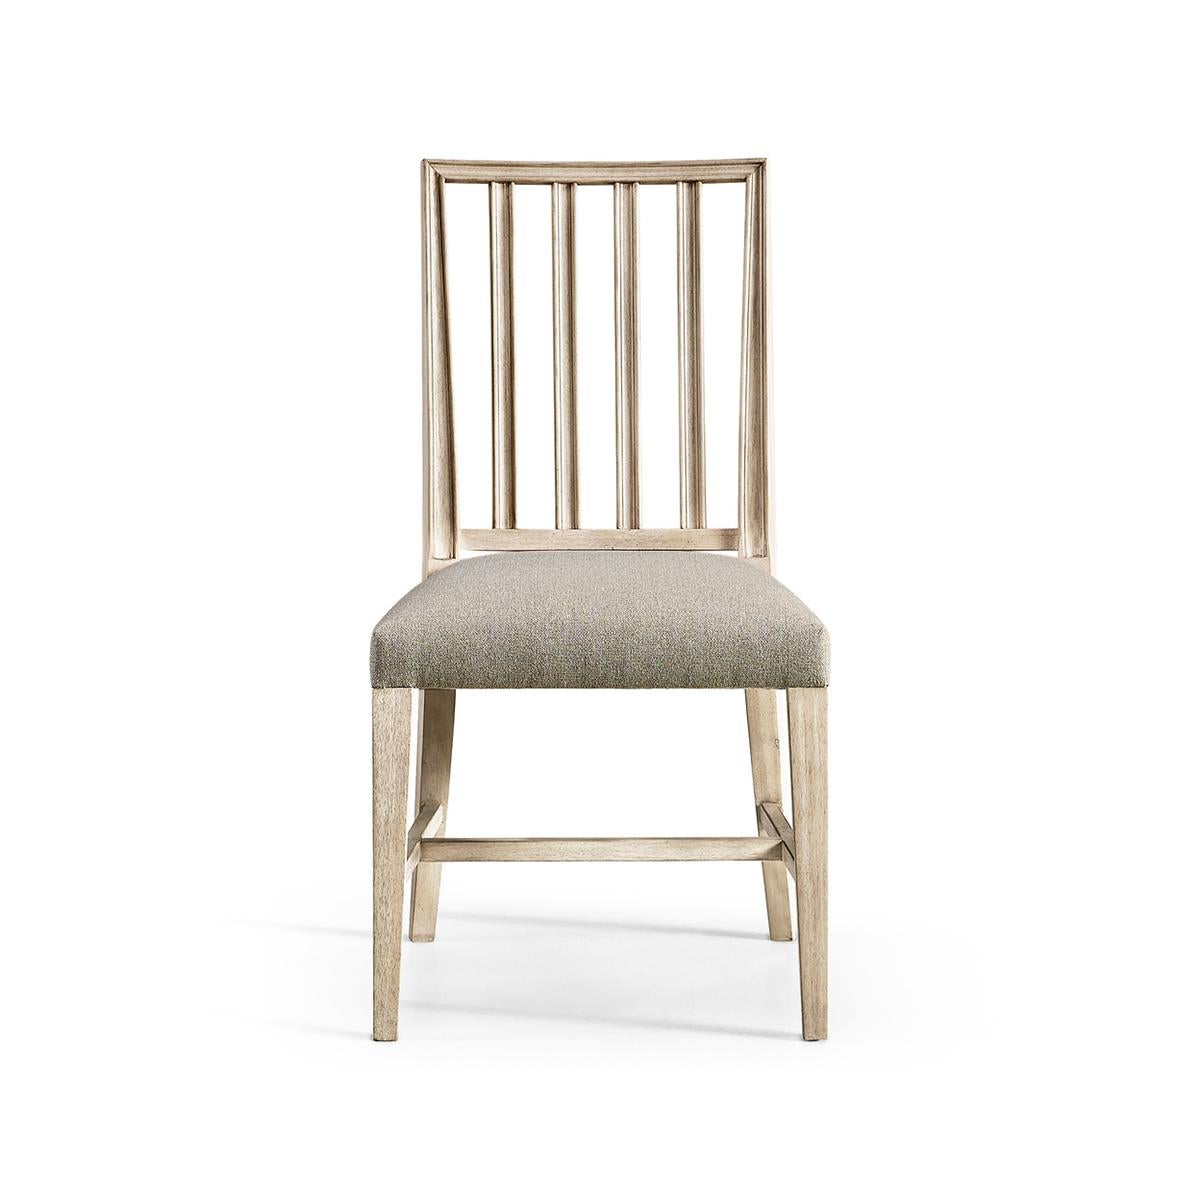 Swedish side chair in a bleached walnut finish, with pristine forms and clean lines capable of dressing a dining space up or down with ease. With a molded slat back and a delightfully plush cushion upholstered in a creamy oatmeal performance fabric